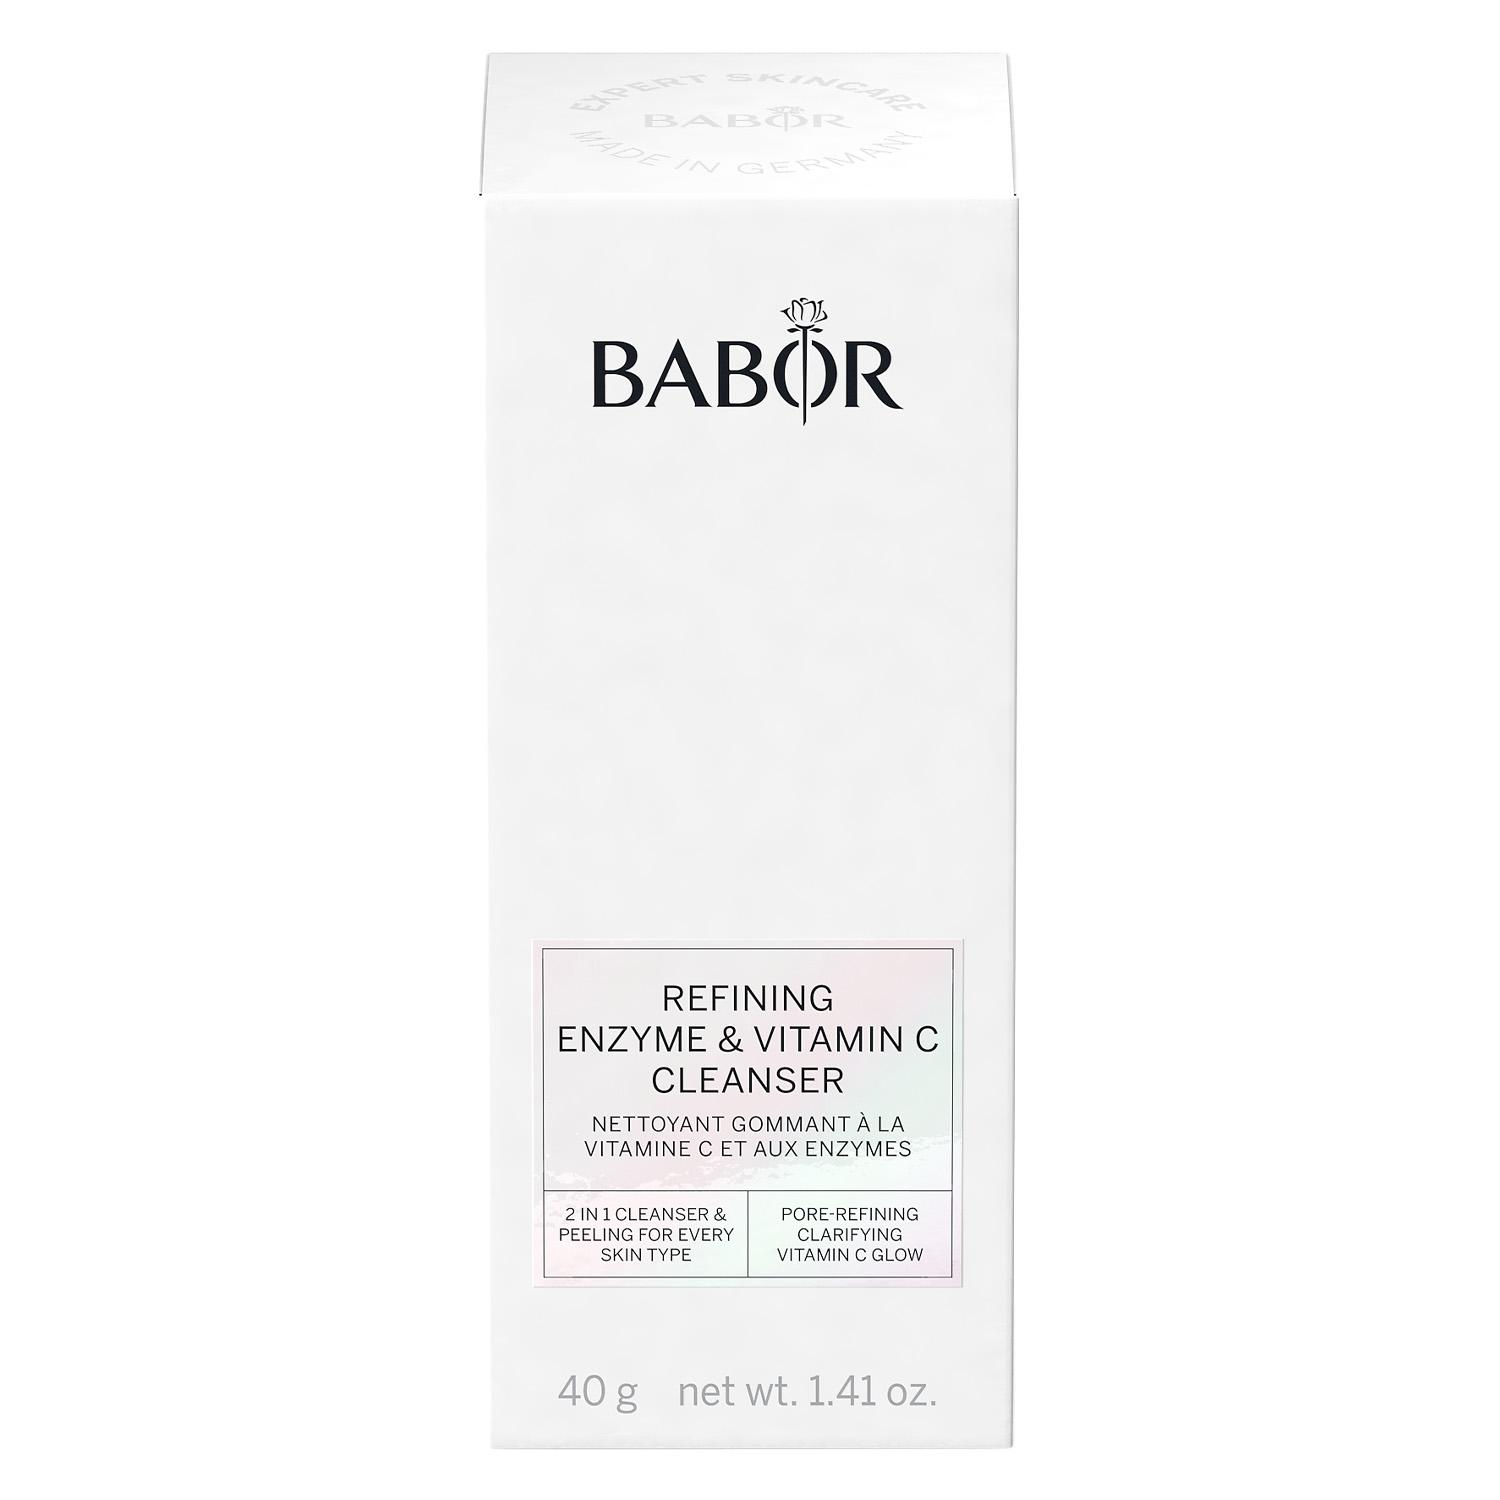 BABOR CLEANSING - Refining Enzyme & Vitamin C